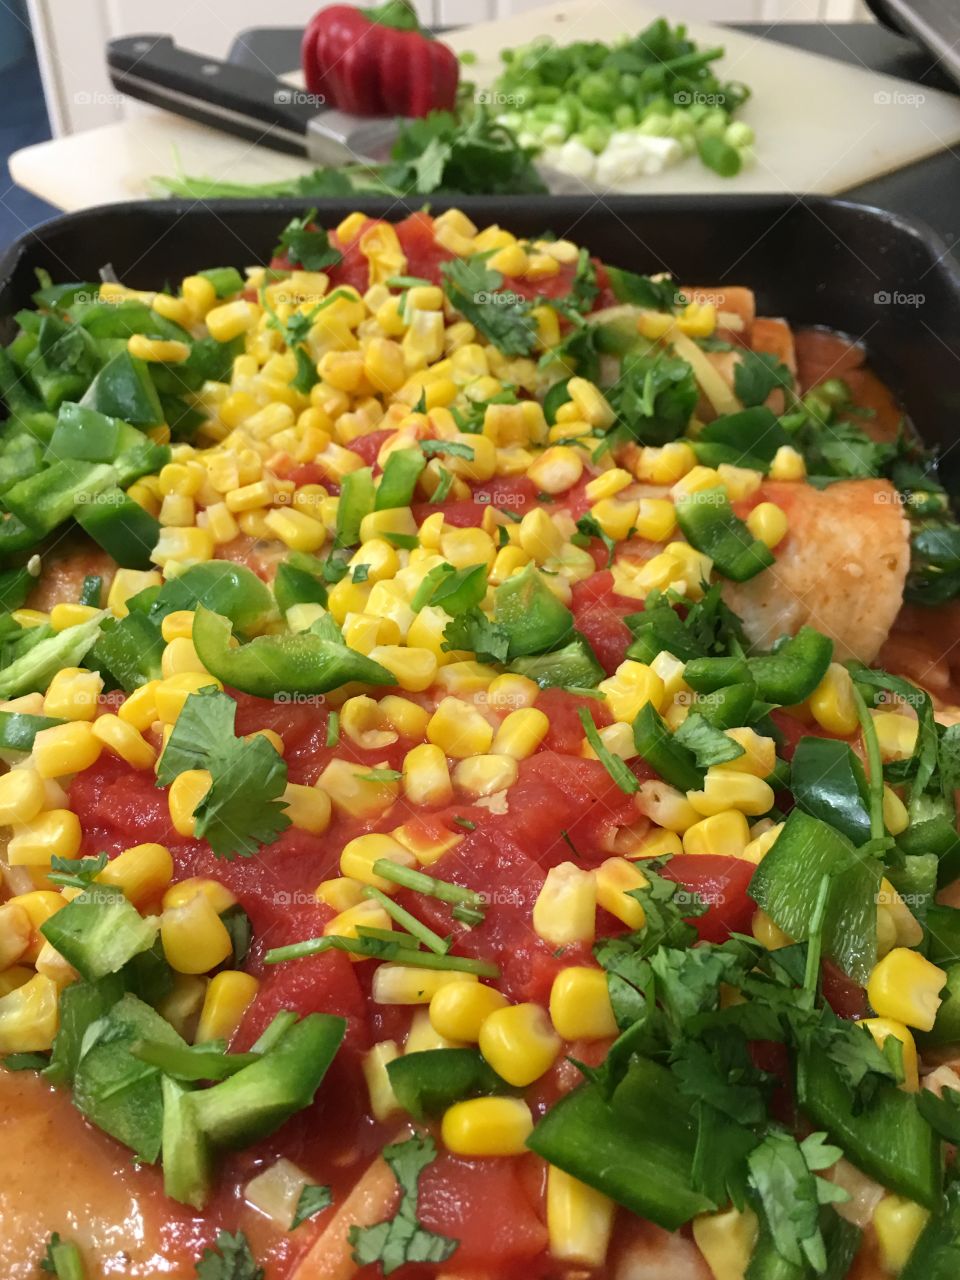 Mexican food at its best, minced beef enchiladas topped with a healthy mixture of corn, cilantro (coriander) tomatoes, sauce and cheese of course